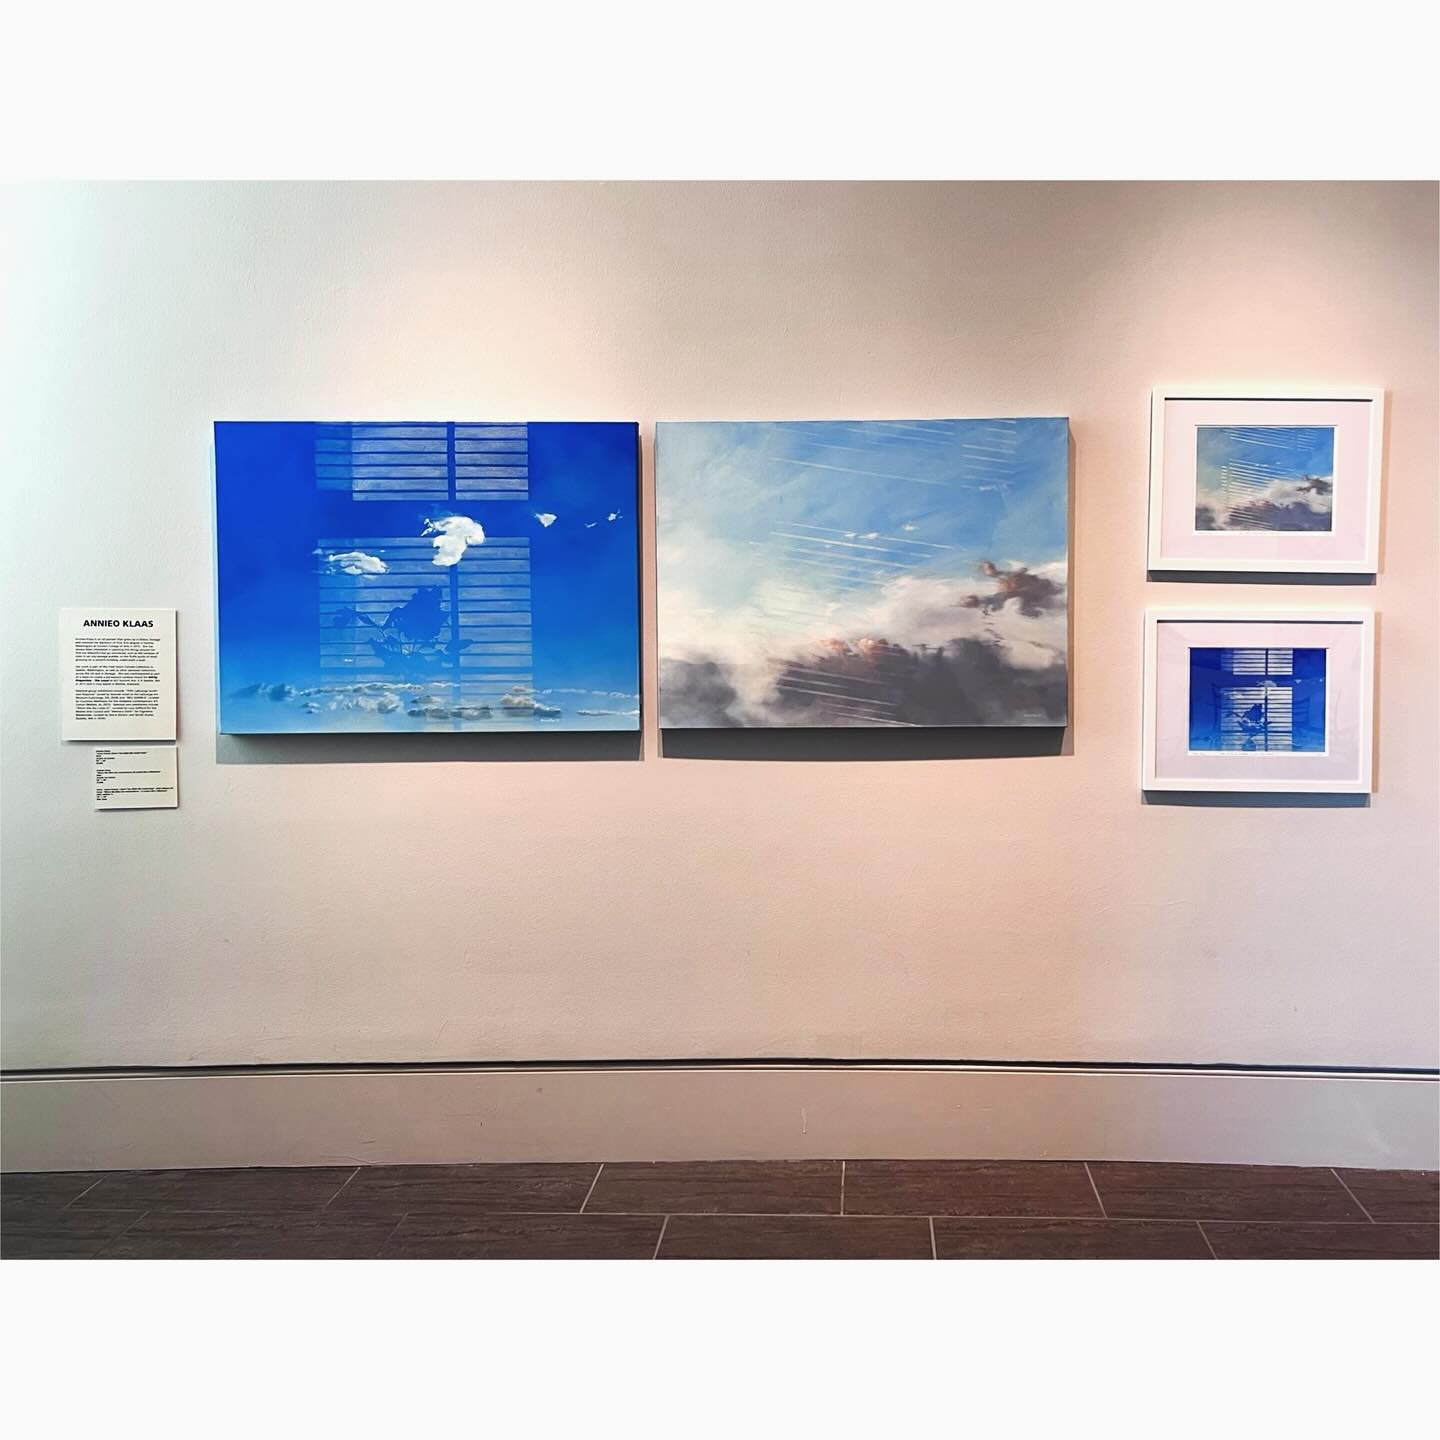 Two of my paintings and their matching prints are now up for sale at the Mobile Museum of Art&rsquo;s Art Store! In preference to having a gift shop, the Mobile Museum of Art has an &ldquo;Art Store&rdquo; that features artwork from local artists. Co